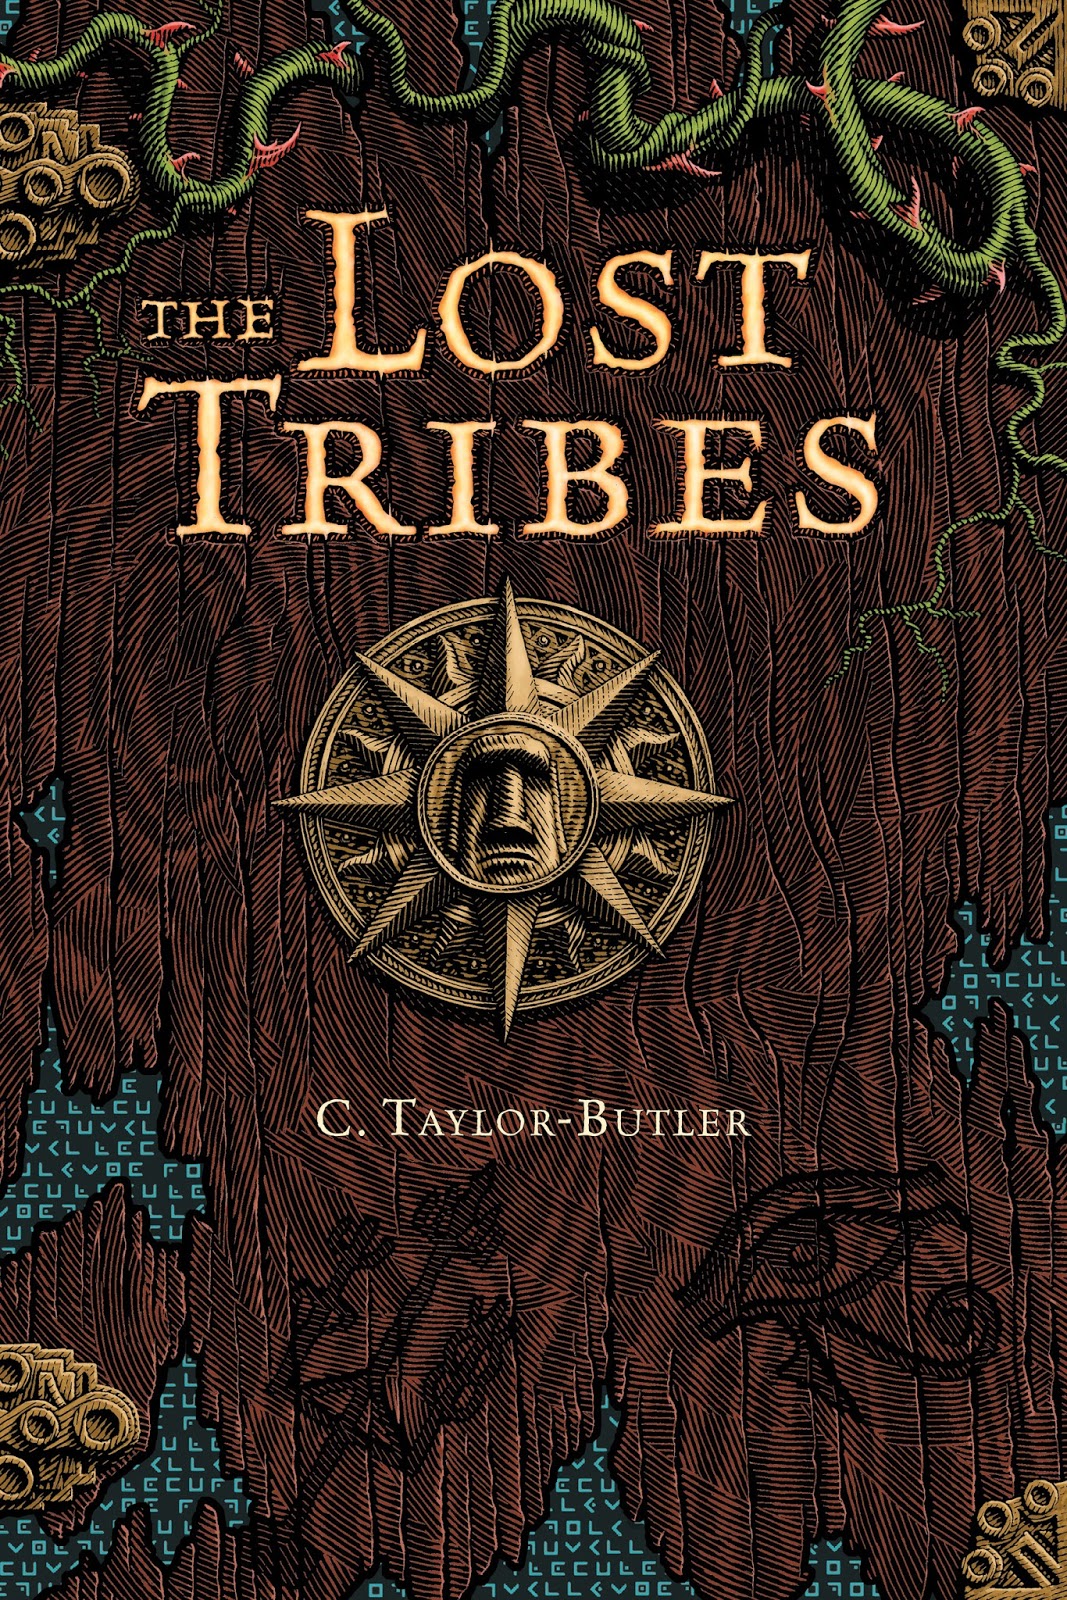 The lost tribe